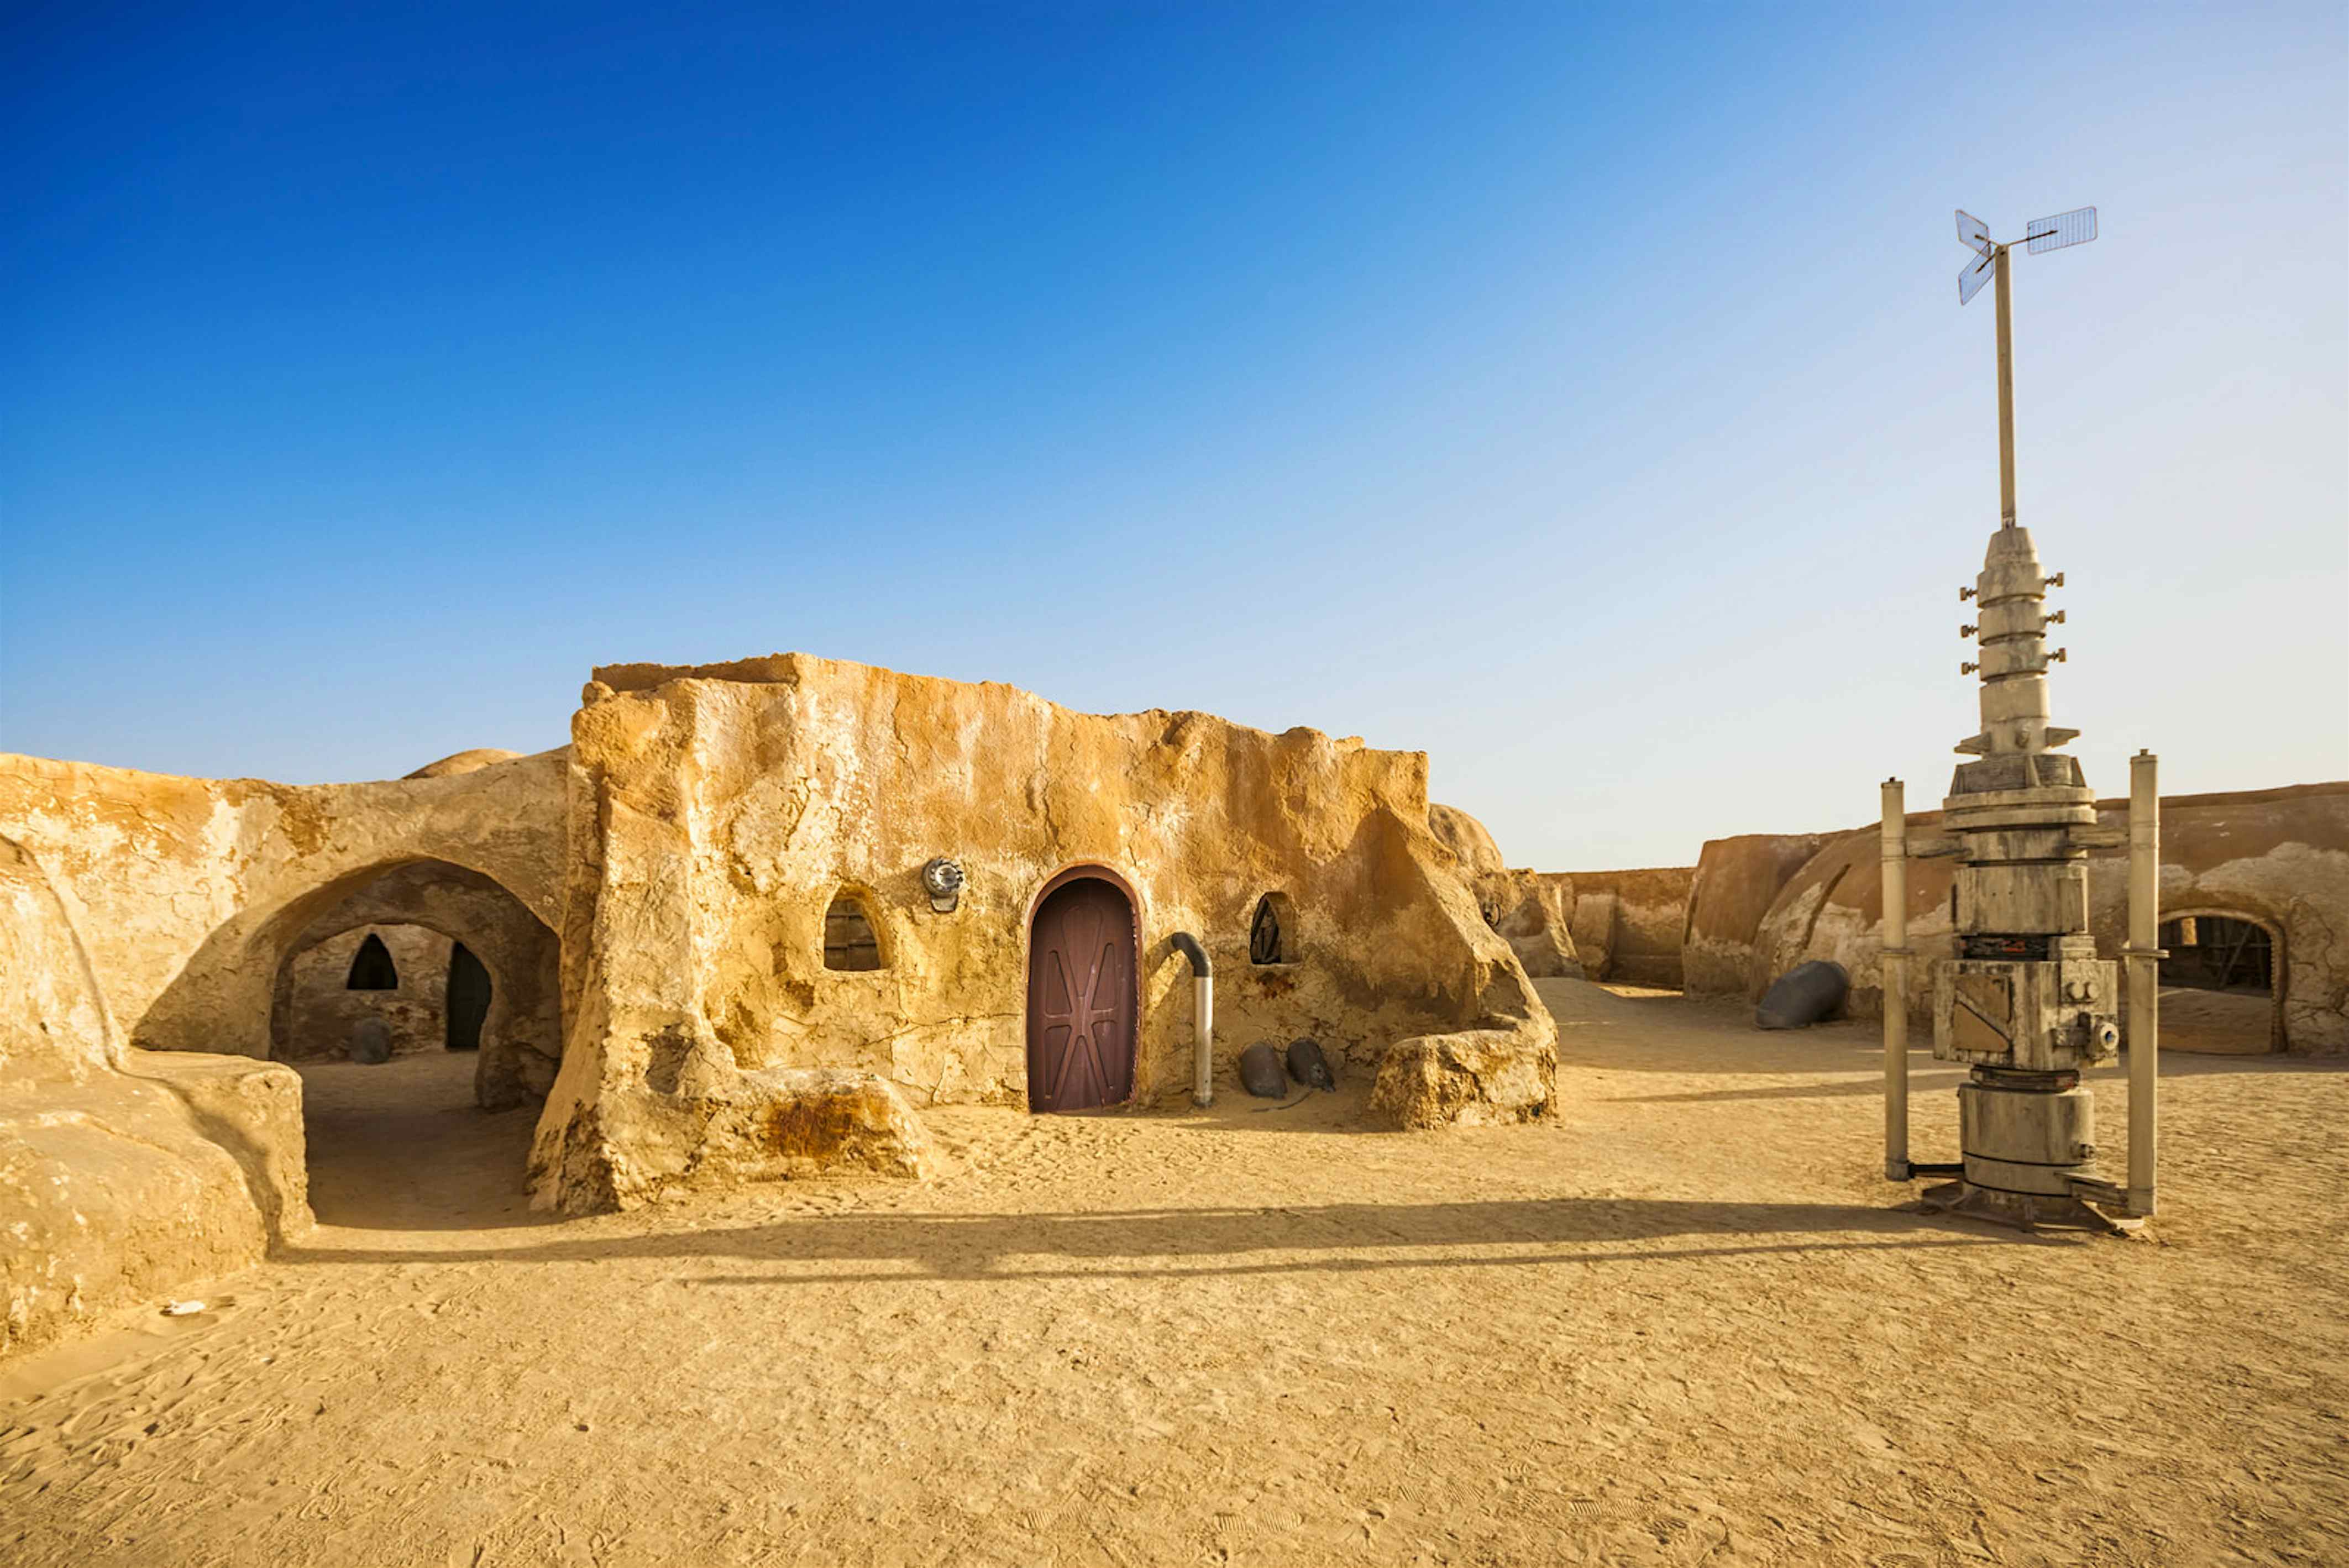 Finding the Force: exploring Star Wars film sets in southern Tunisia